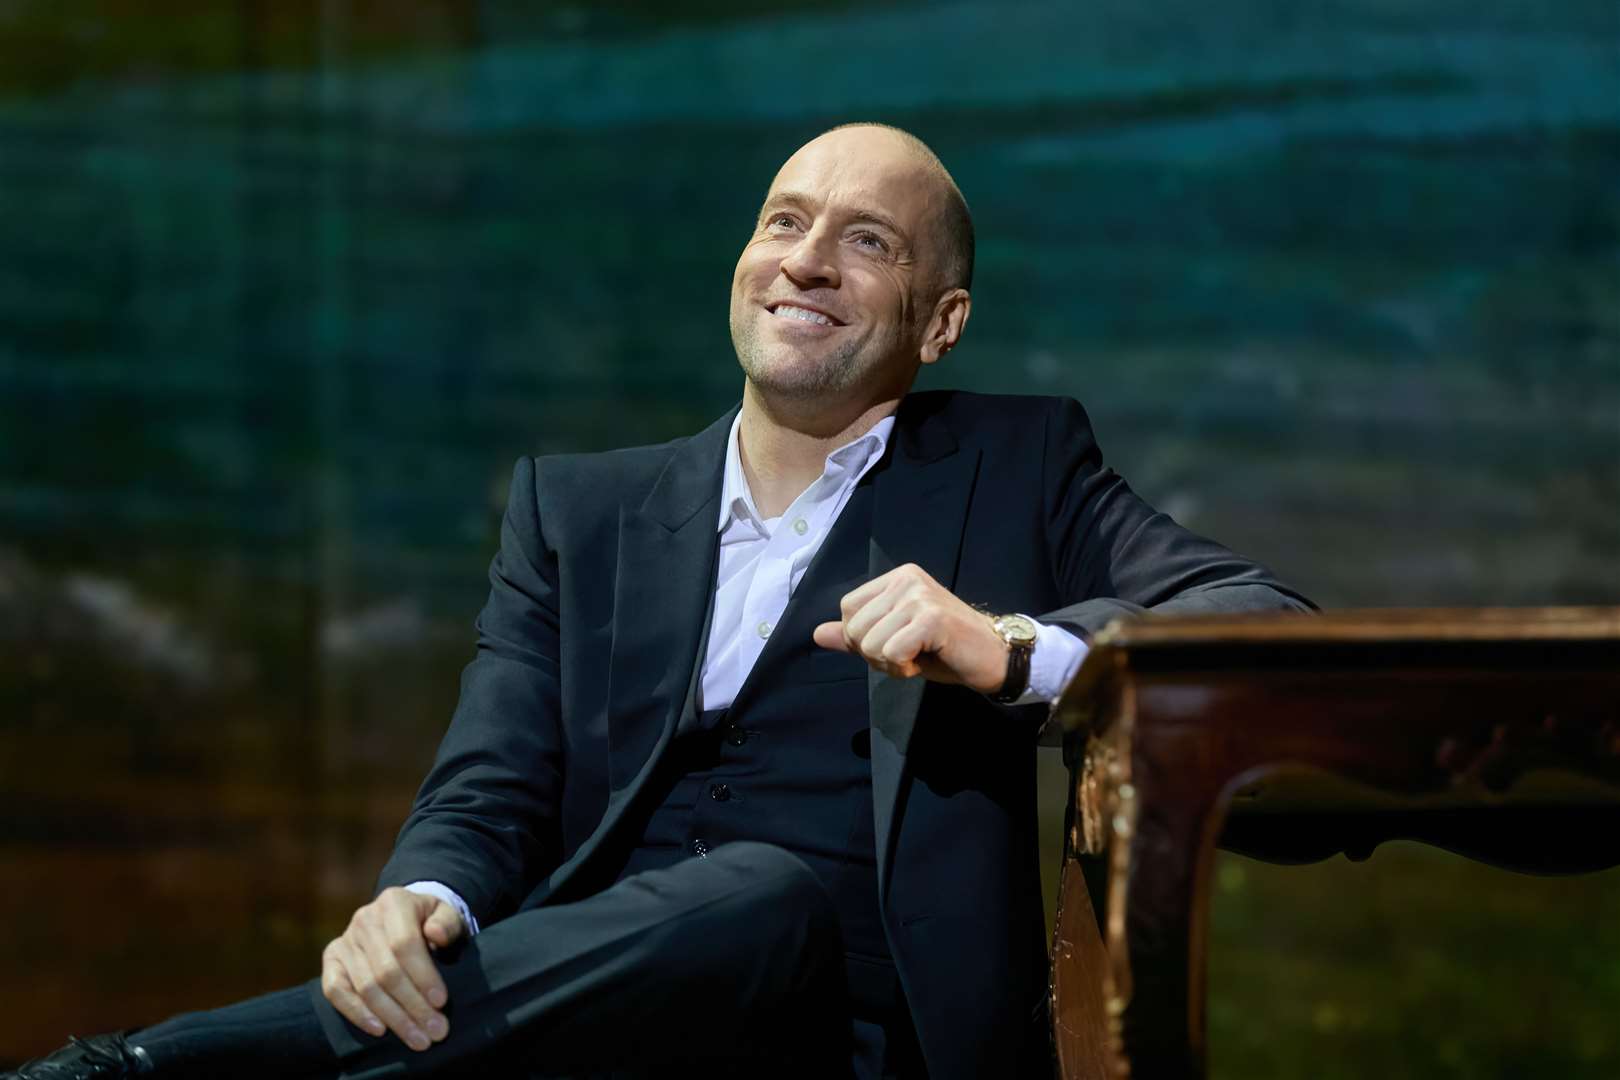 Derren Brown will be mesmerising audiences at the Orchard Theatre with his new tour, Showman. Picture: Mark Douet